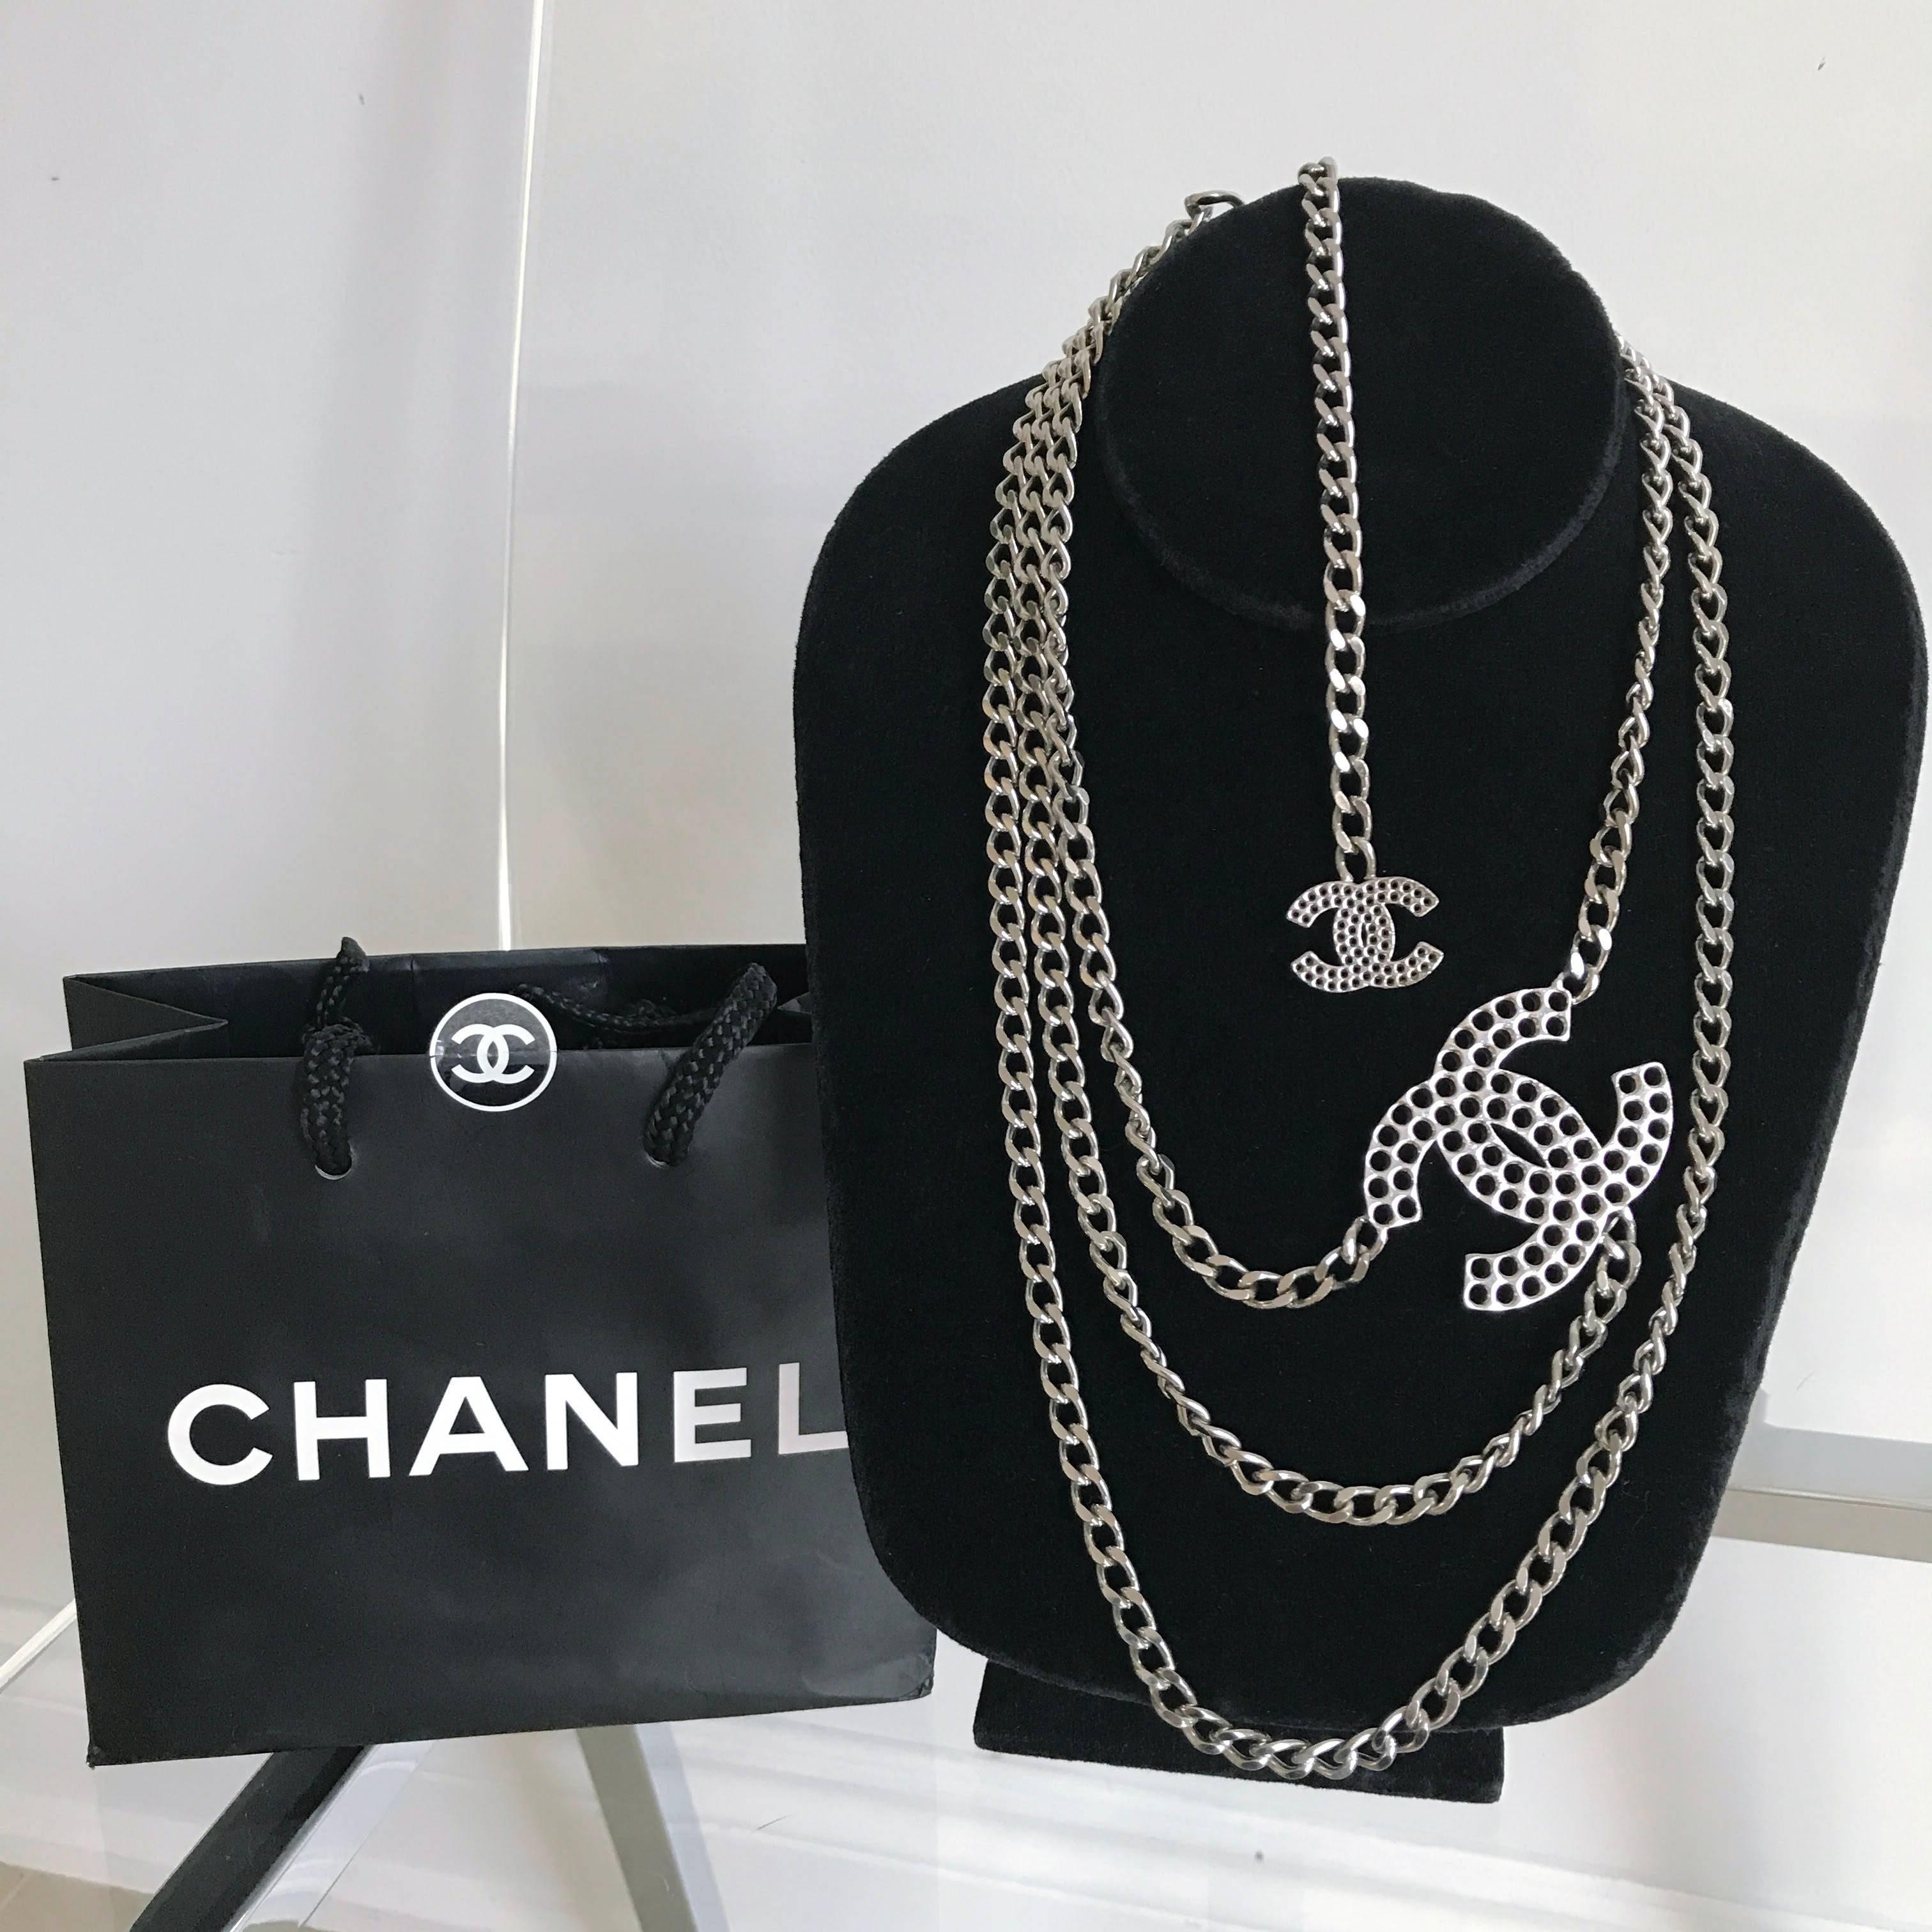 Chanel 03P silvertone metal chain belt with perforated CC logo.  Hooks anywhere along the 45" total length chain. Largest CC measures approximately 1.75" x 1-3.8".  Excellent pre-owned condition.

We ship worldwide.